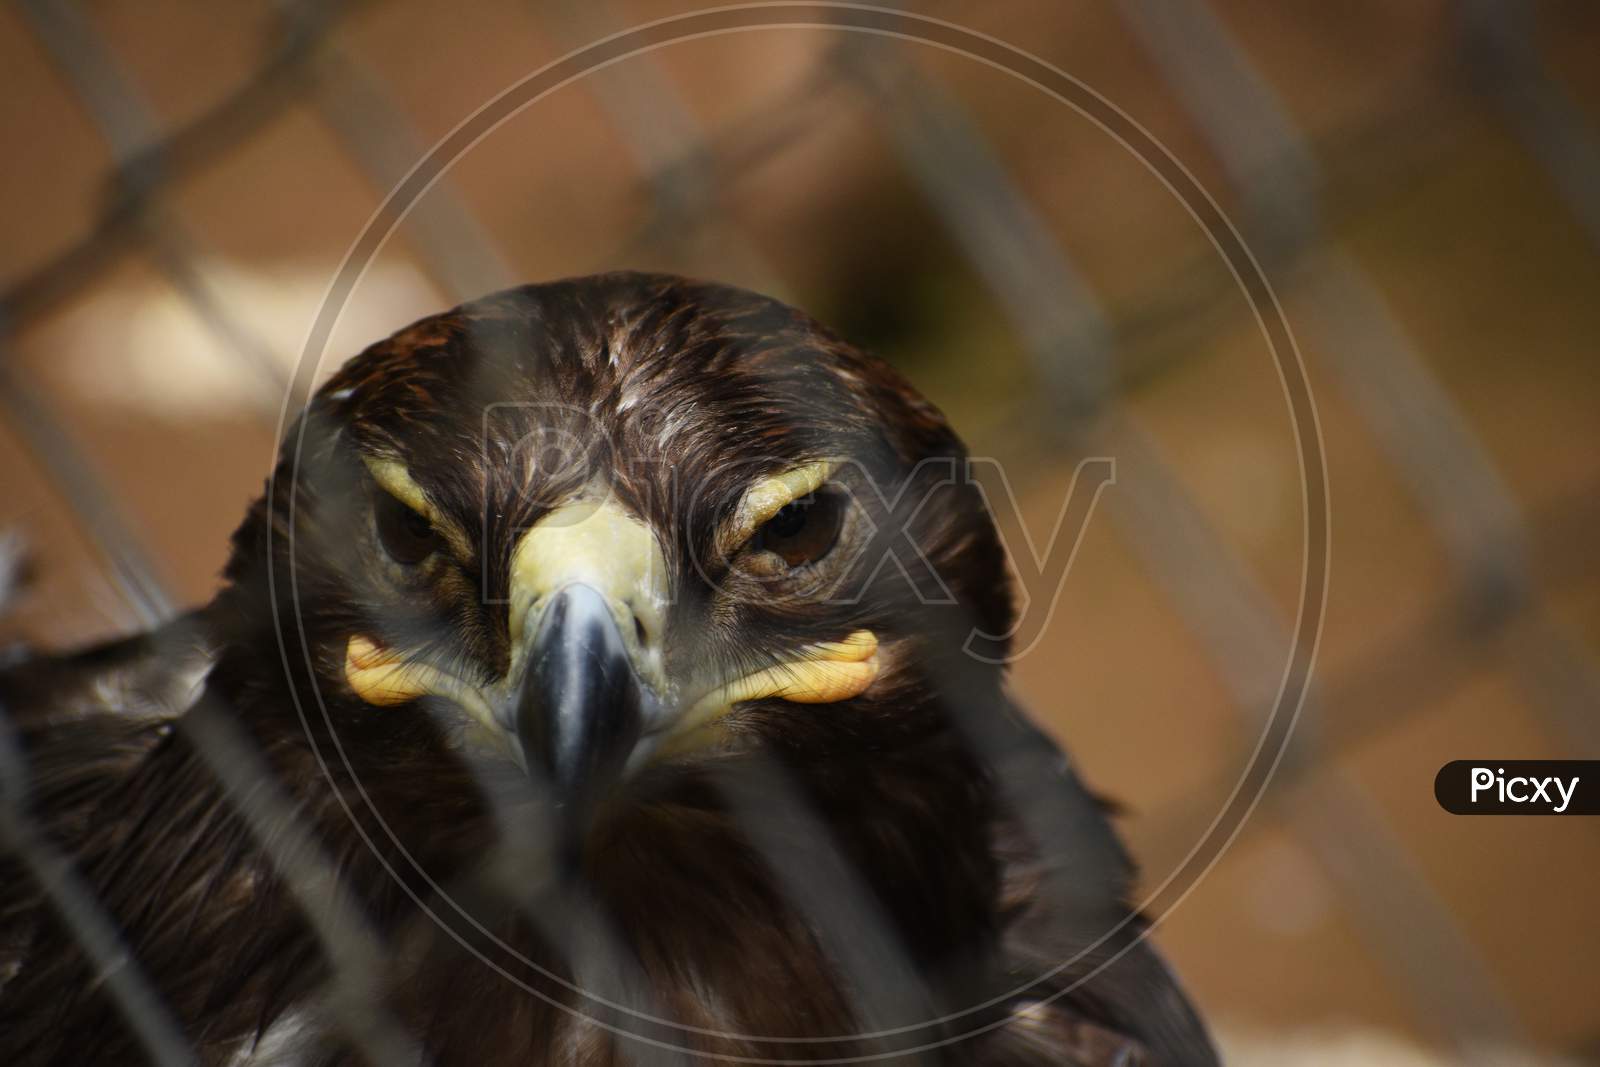 A Beautiful Golden Eagle In The Cage of A Zoo